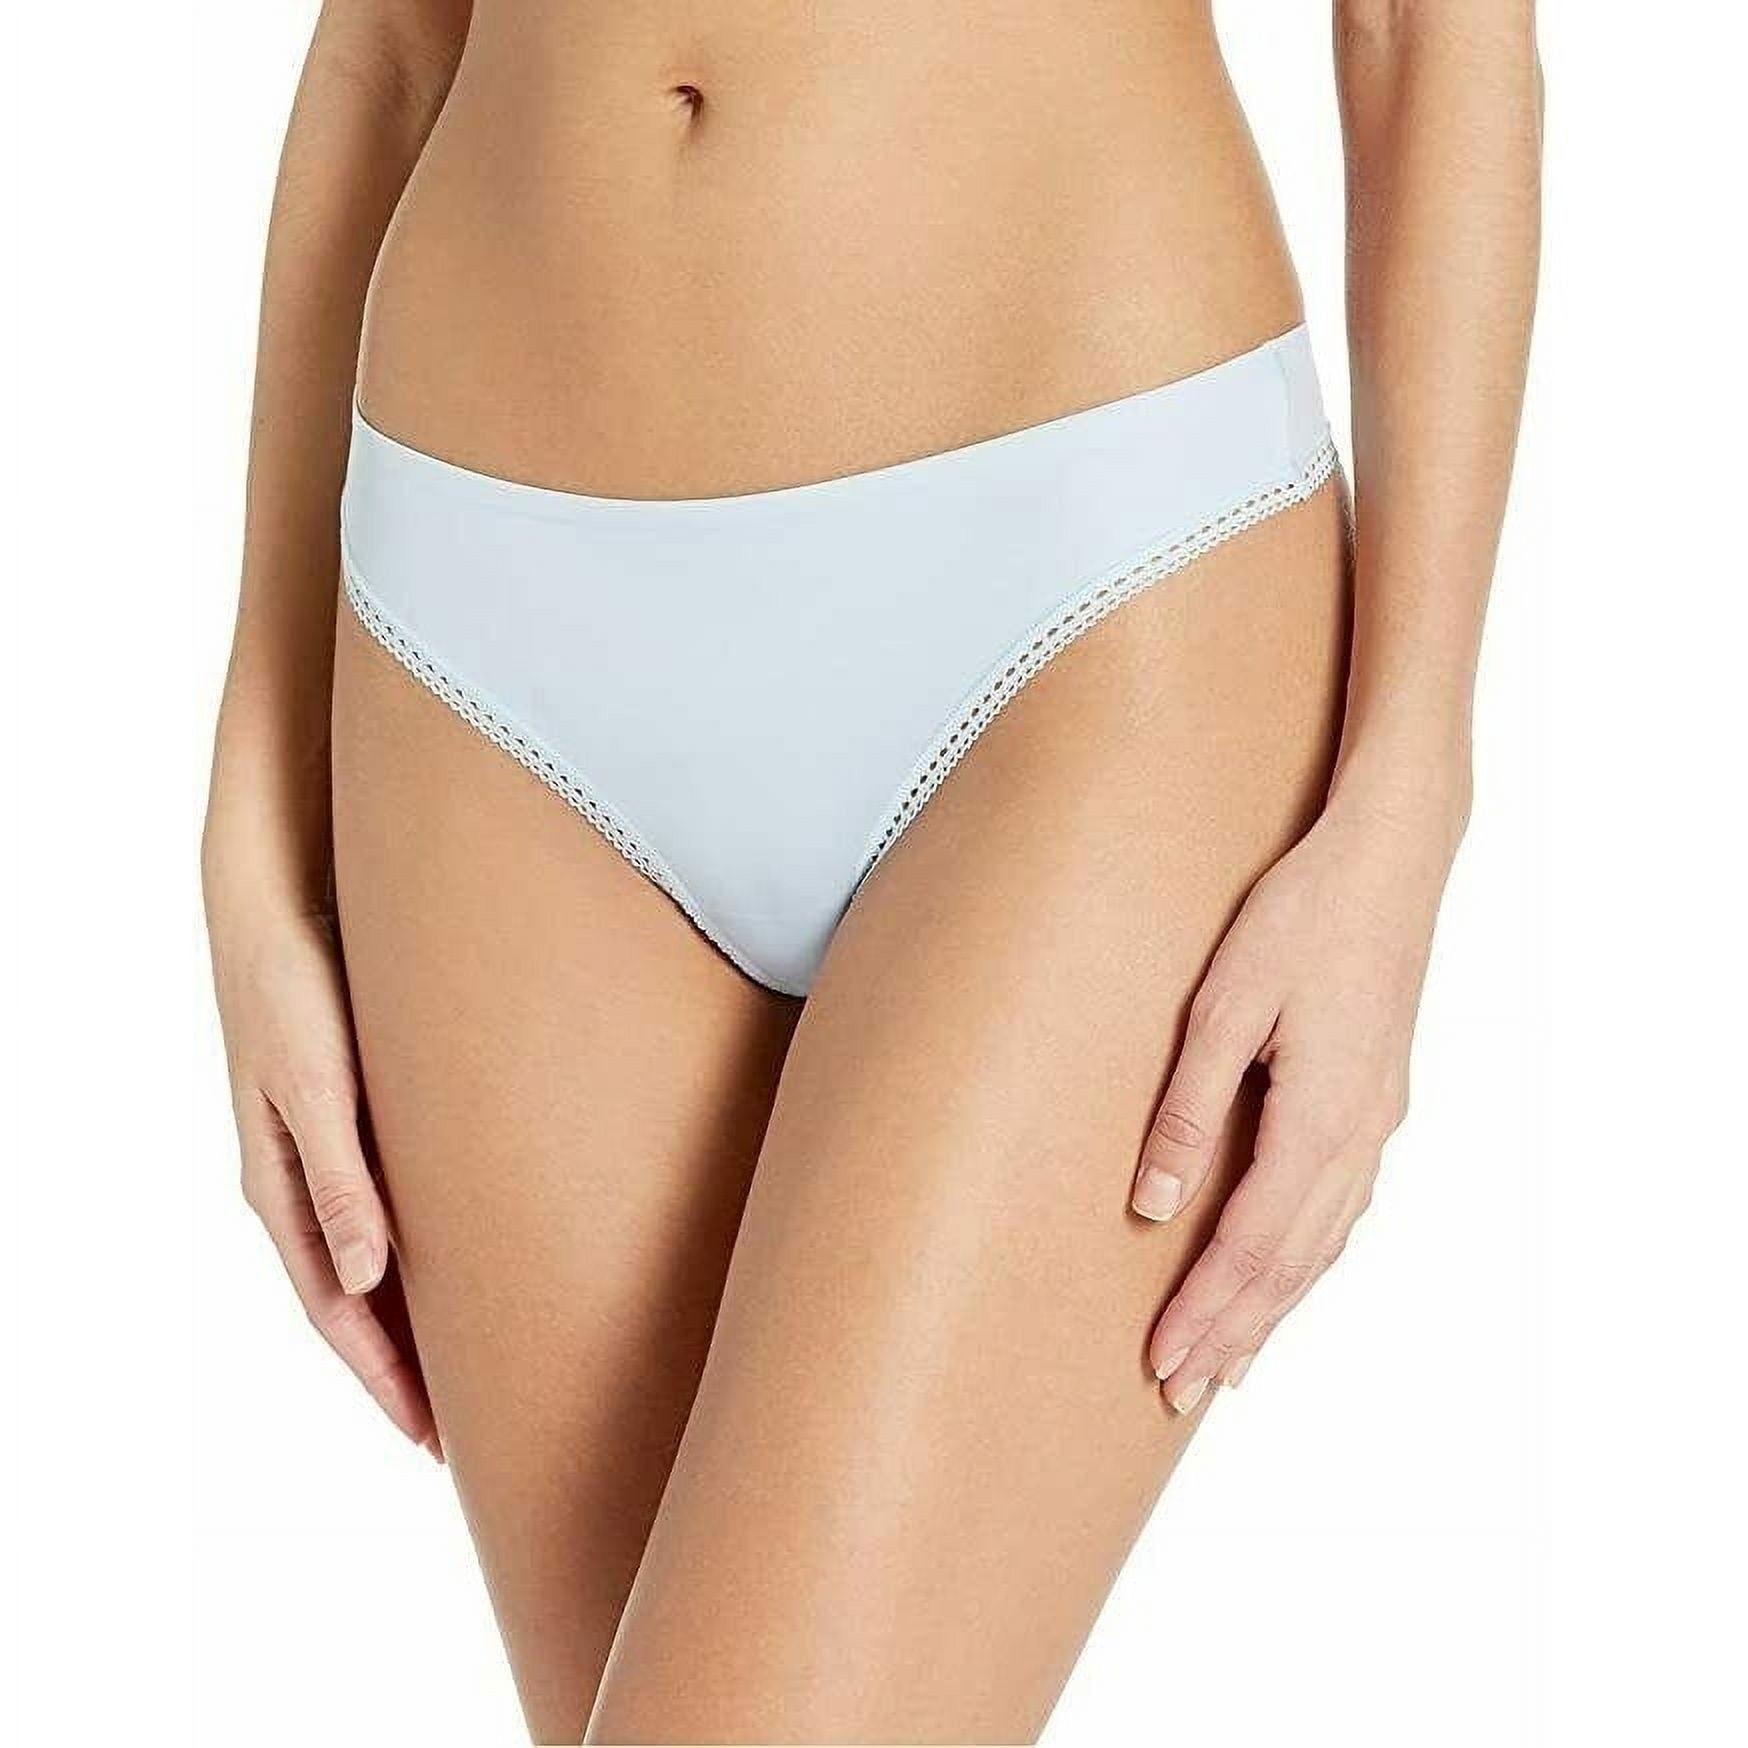 Calvin Klein Women's Thong Panties, Baby Blue, M New with box/tags 